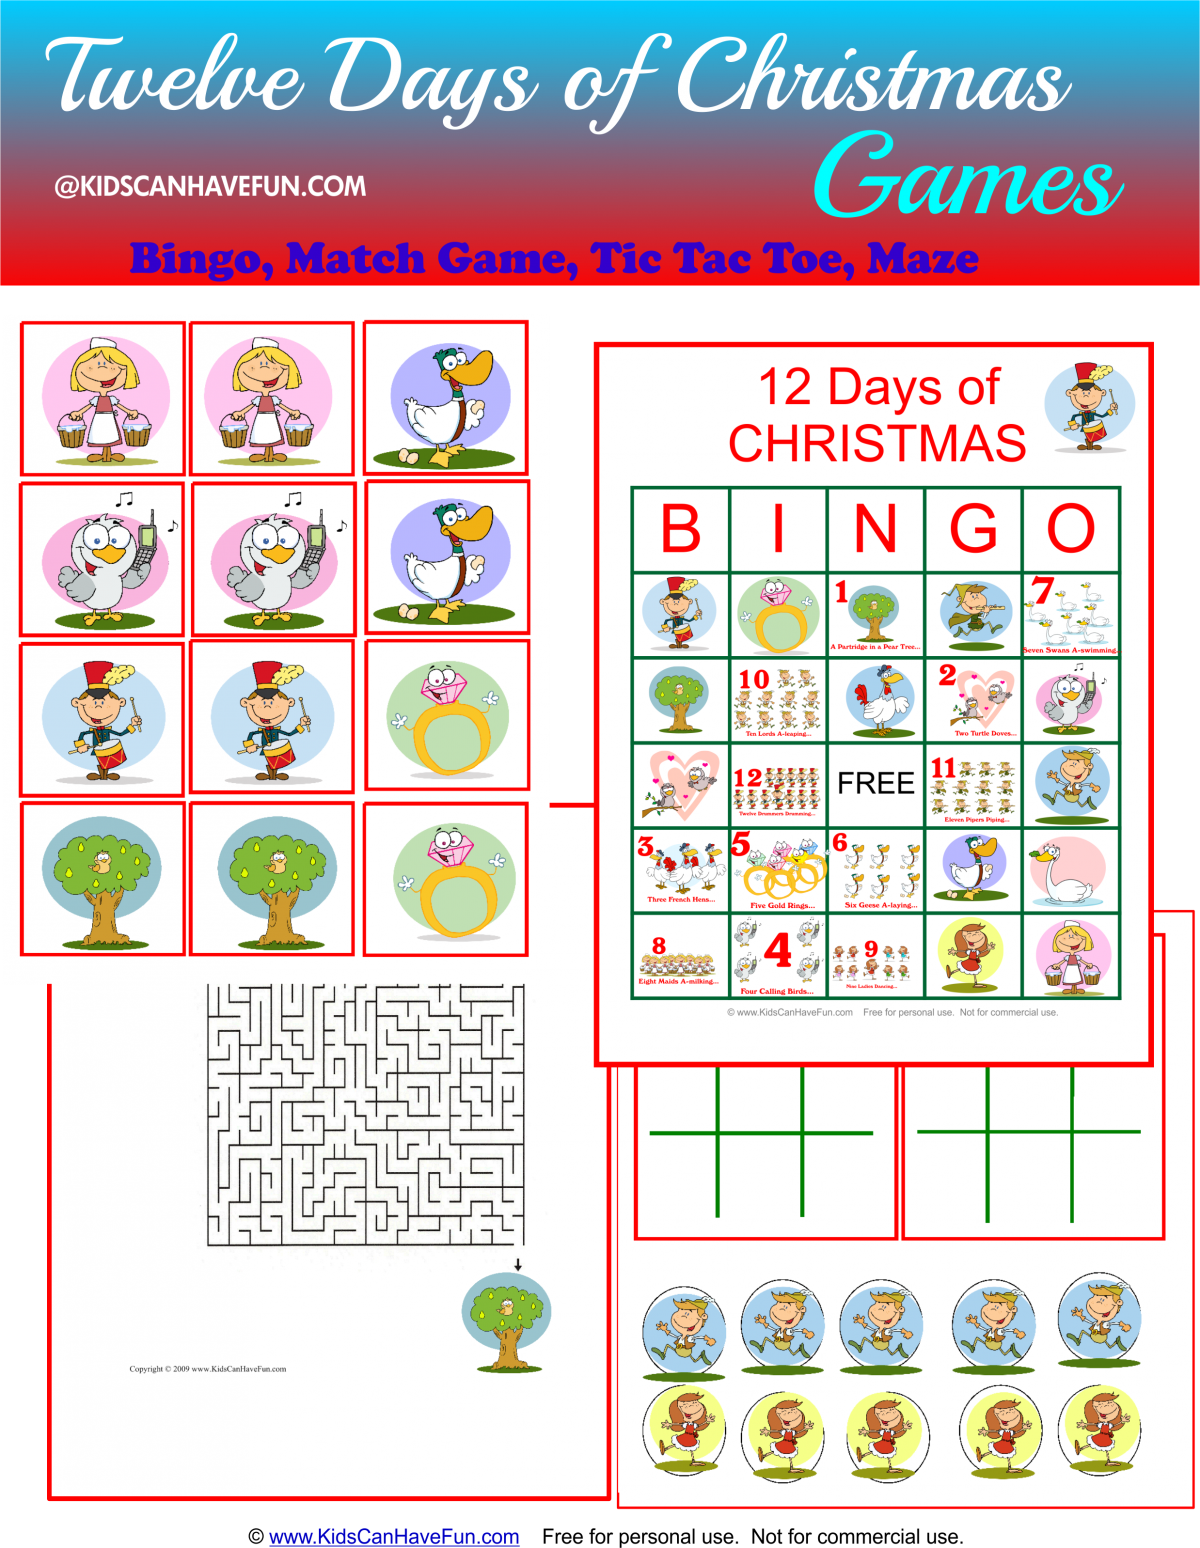 12-days-of-christmas-free-printable-playing-cards-flanders-family